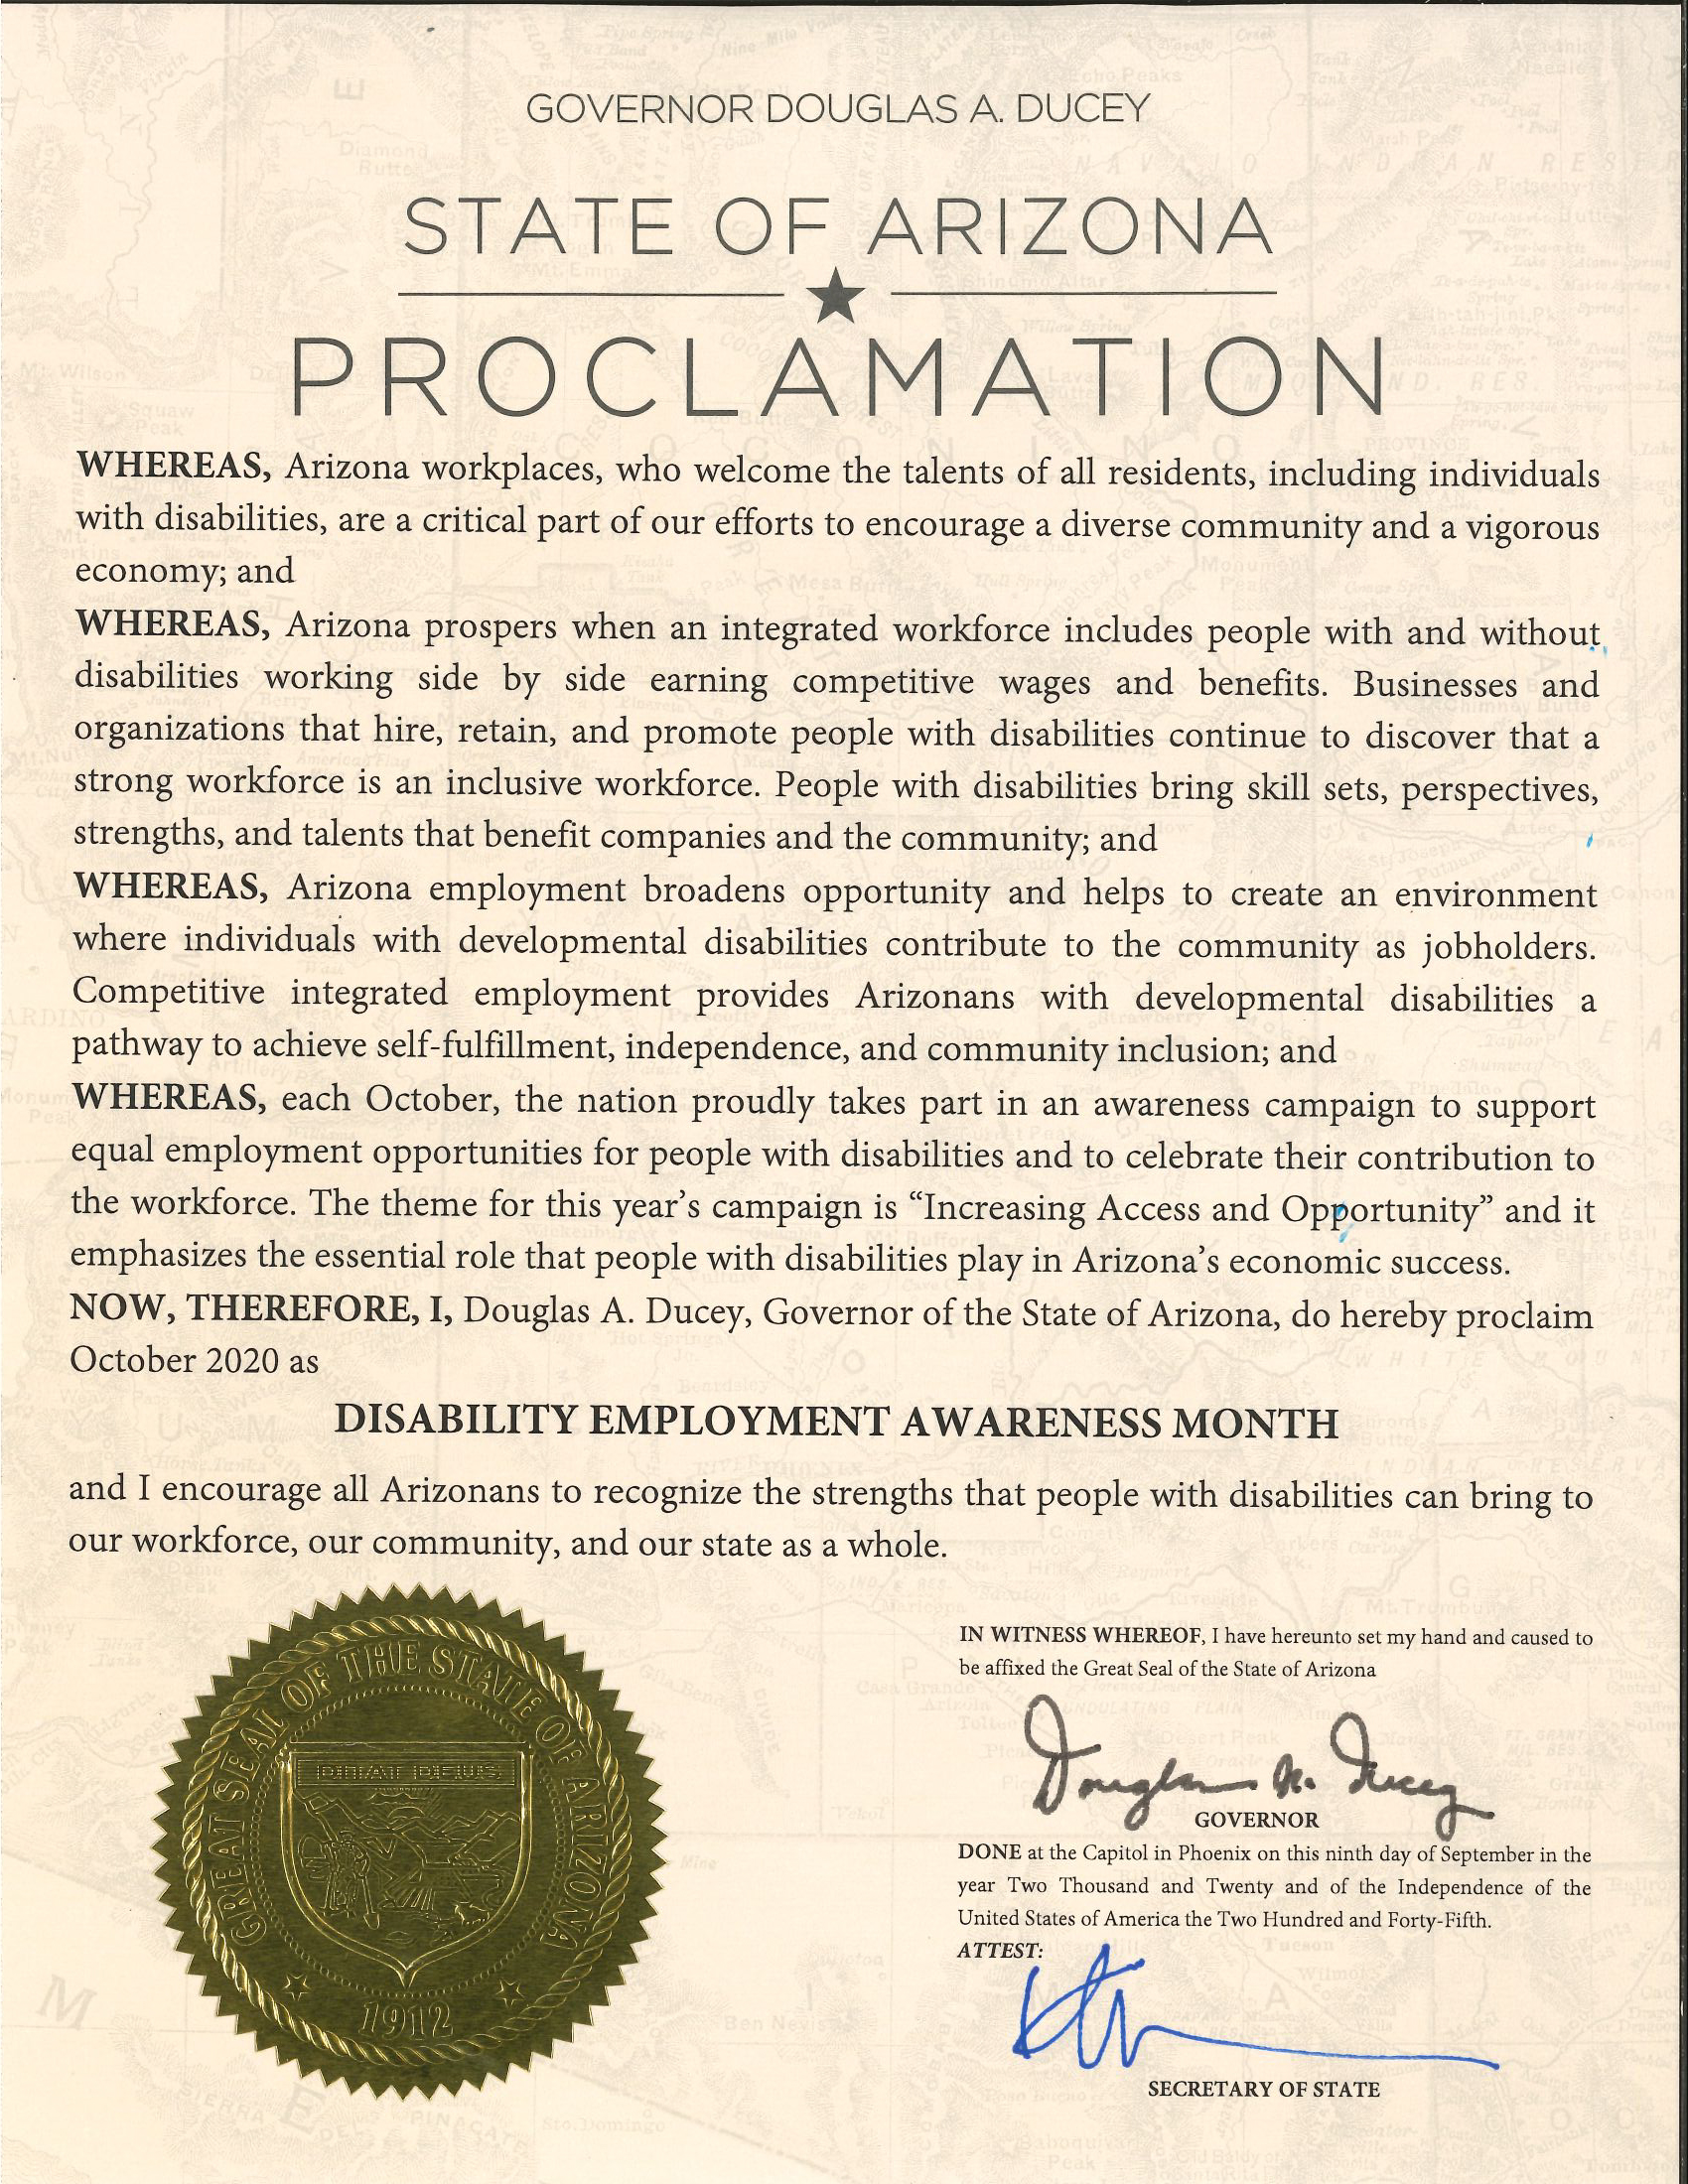 Image of October 2020 Disability Employment Awareness Month in Arizona